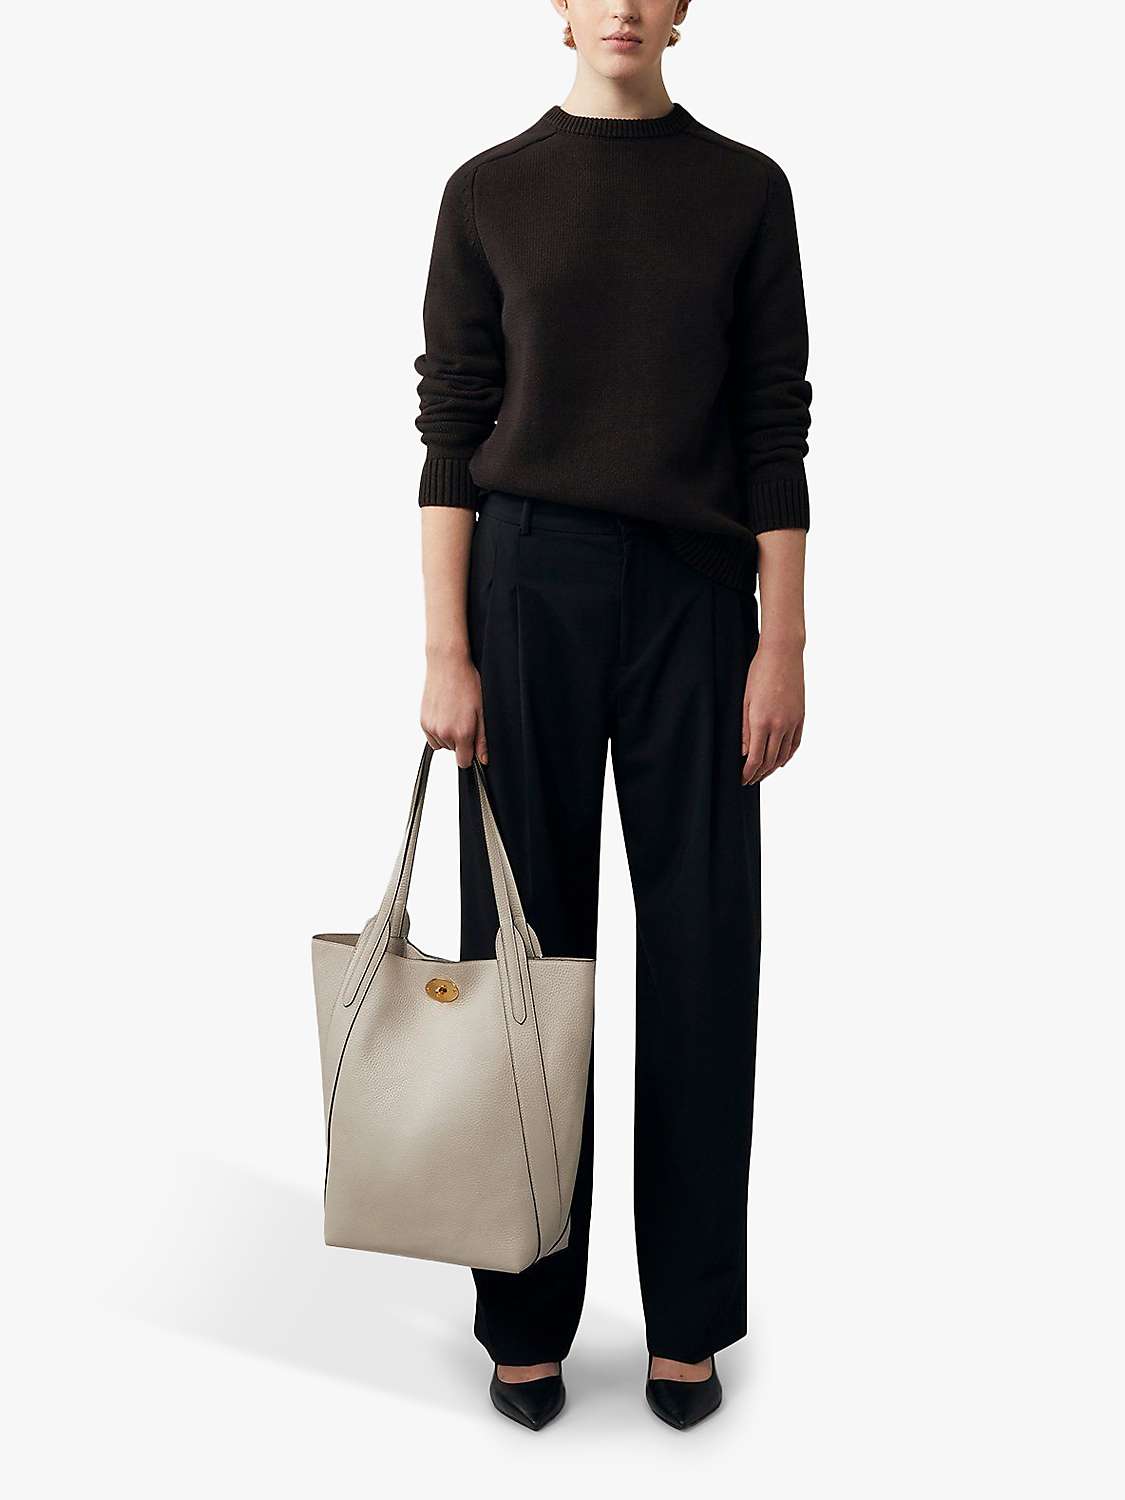 Buy Mulberry North South Bayswater Heavy Grain Tote Bag Online at johnlewis.com